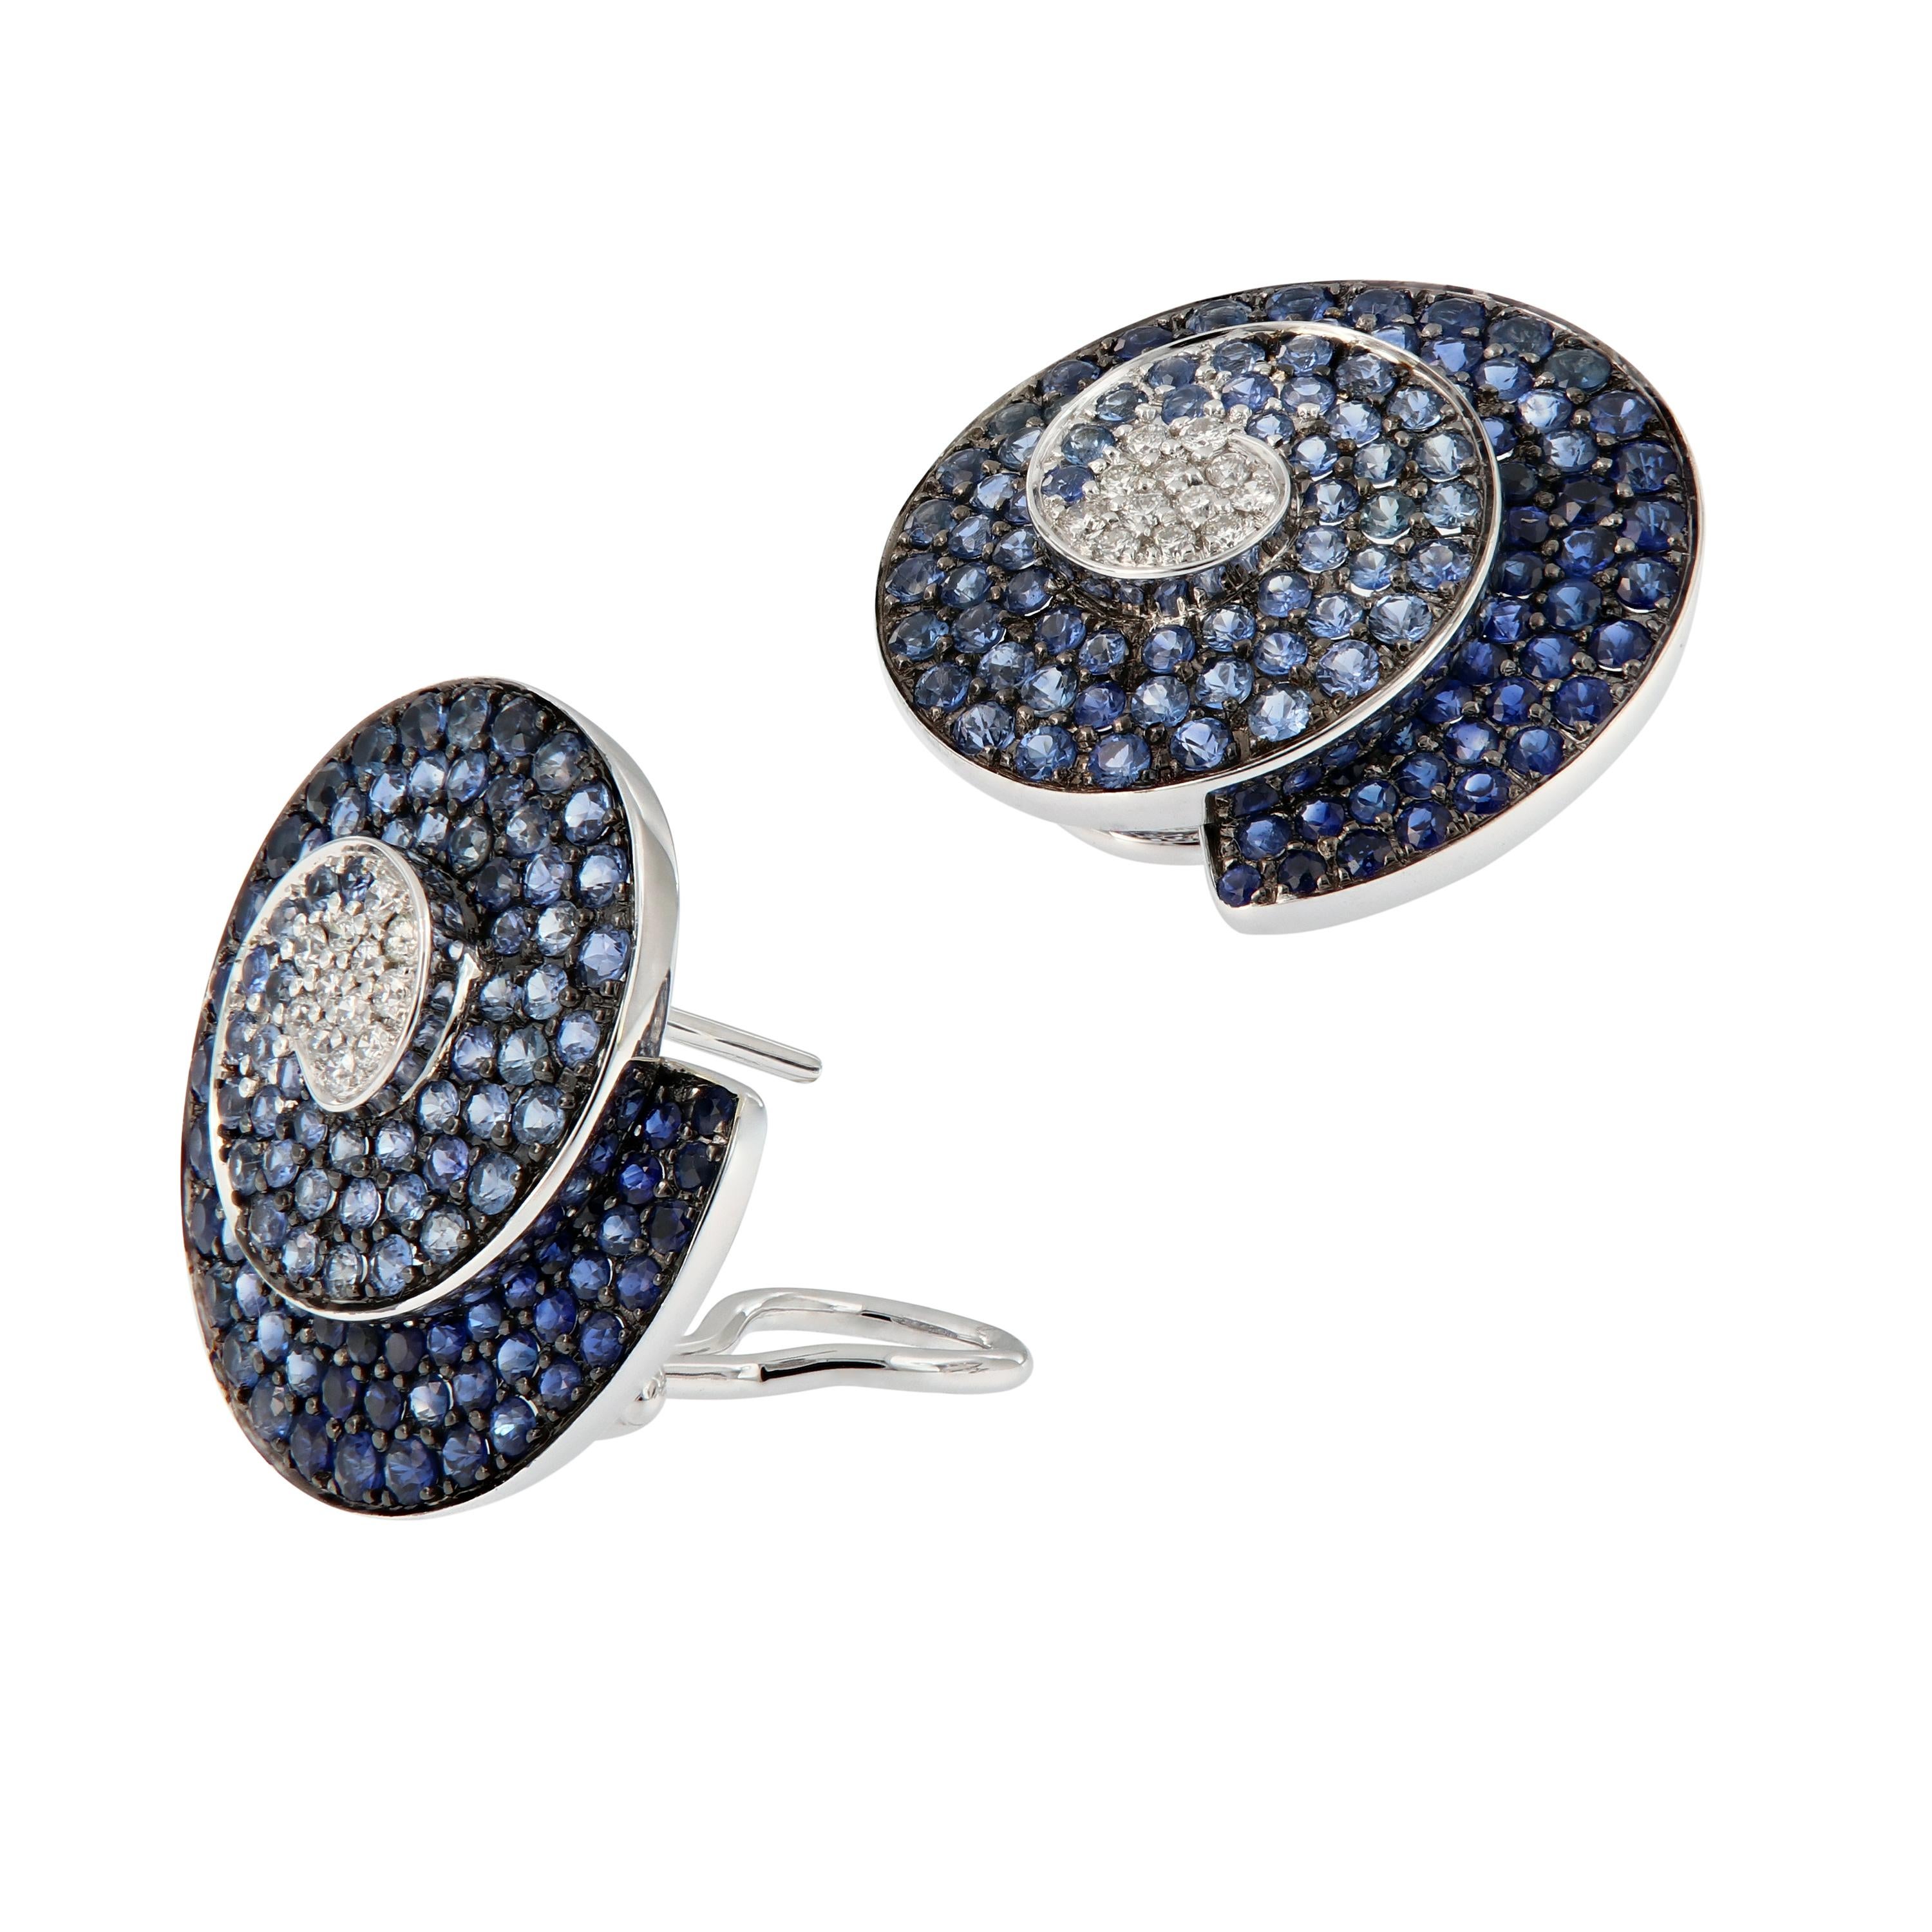 These elegant earrings each feature a swirl design of graduating shades of blue sapphires and white diamonds, creating a beautiful ombre effect. Earrings are crafted in 18k white gold with black rhodium overlay. 

Sapphires 1.18 cttw
DK Sapphires